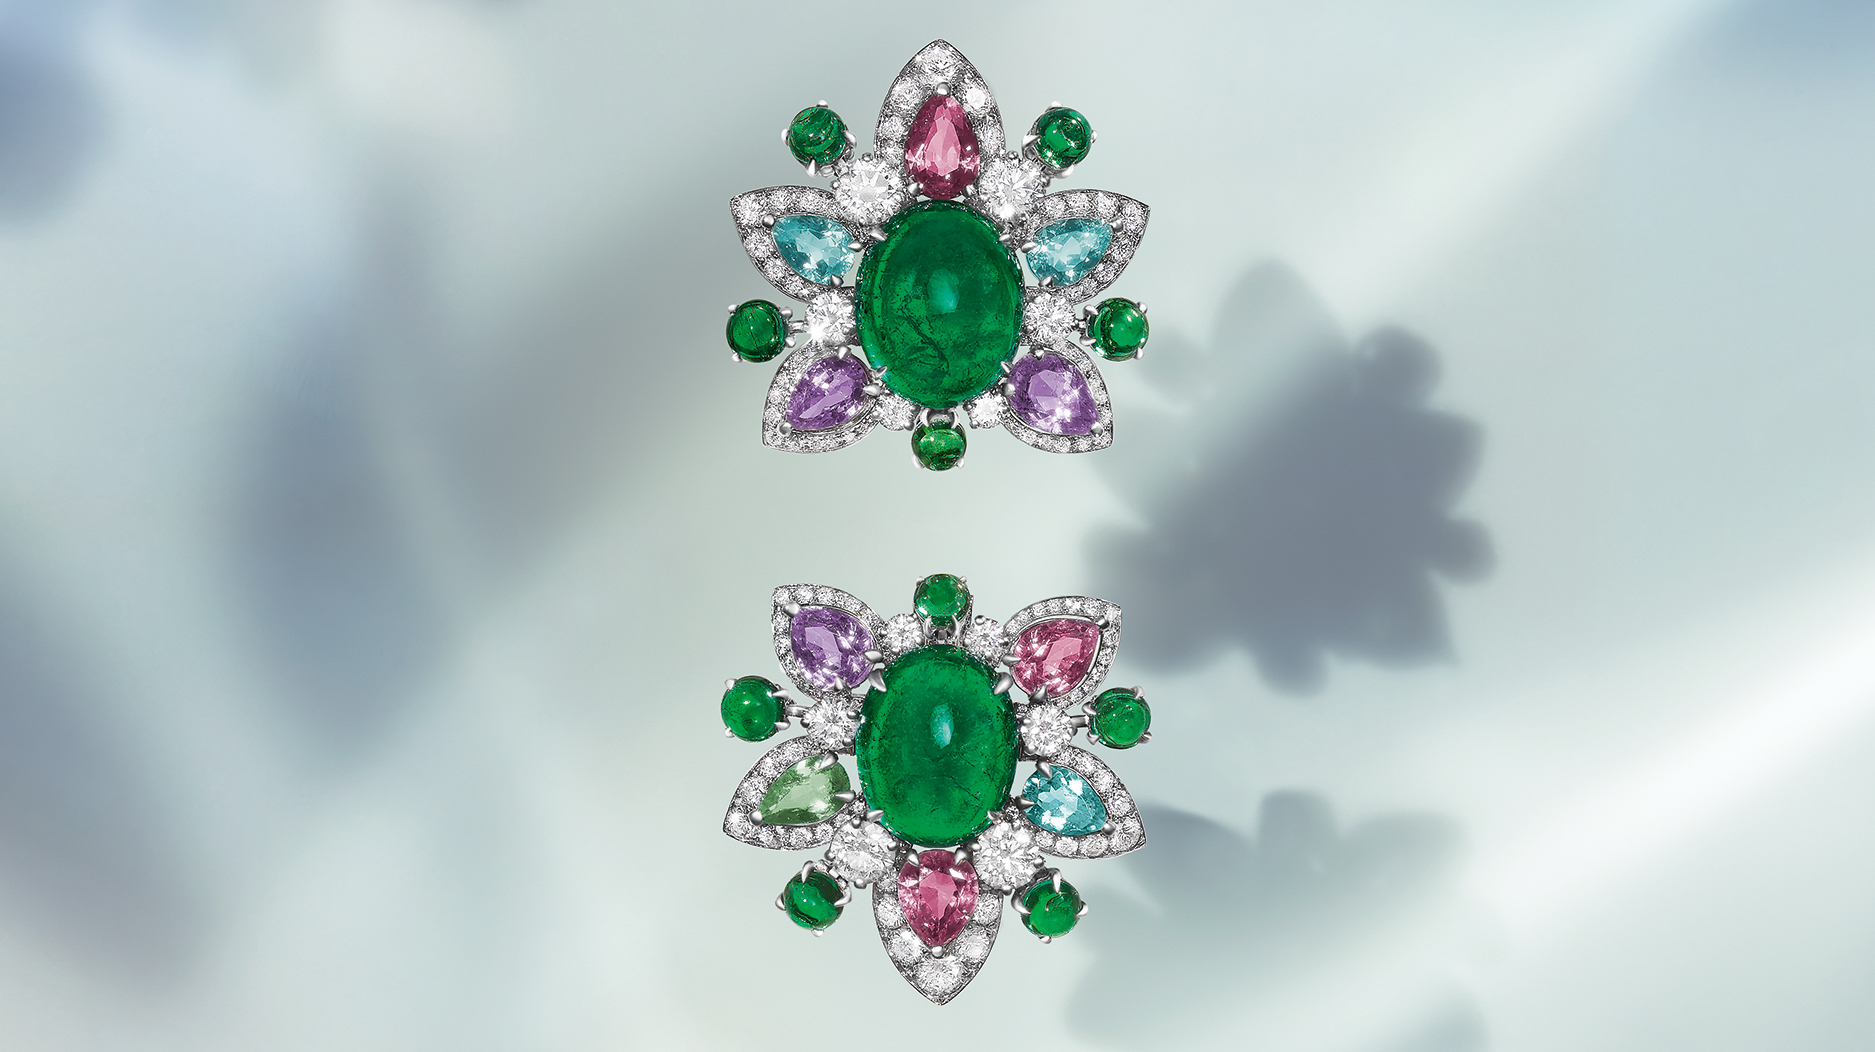 5 New Jewelry Collections from Bulgari